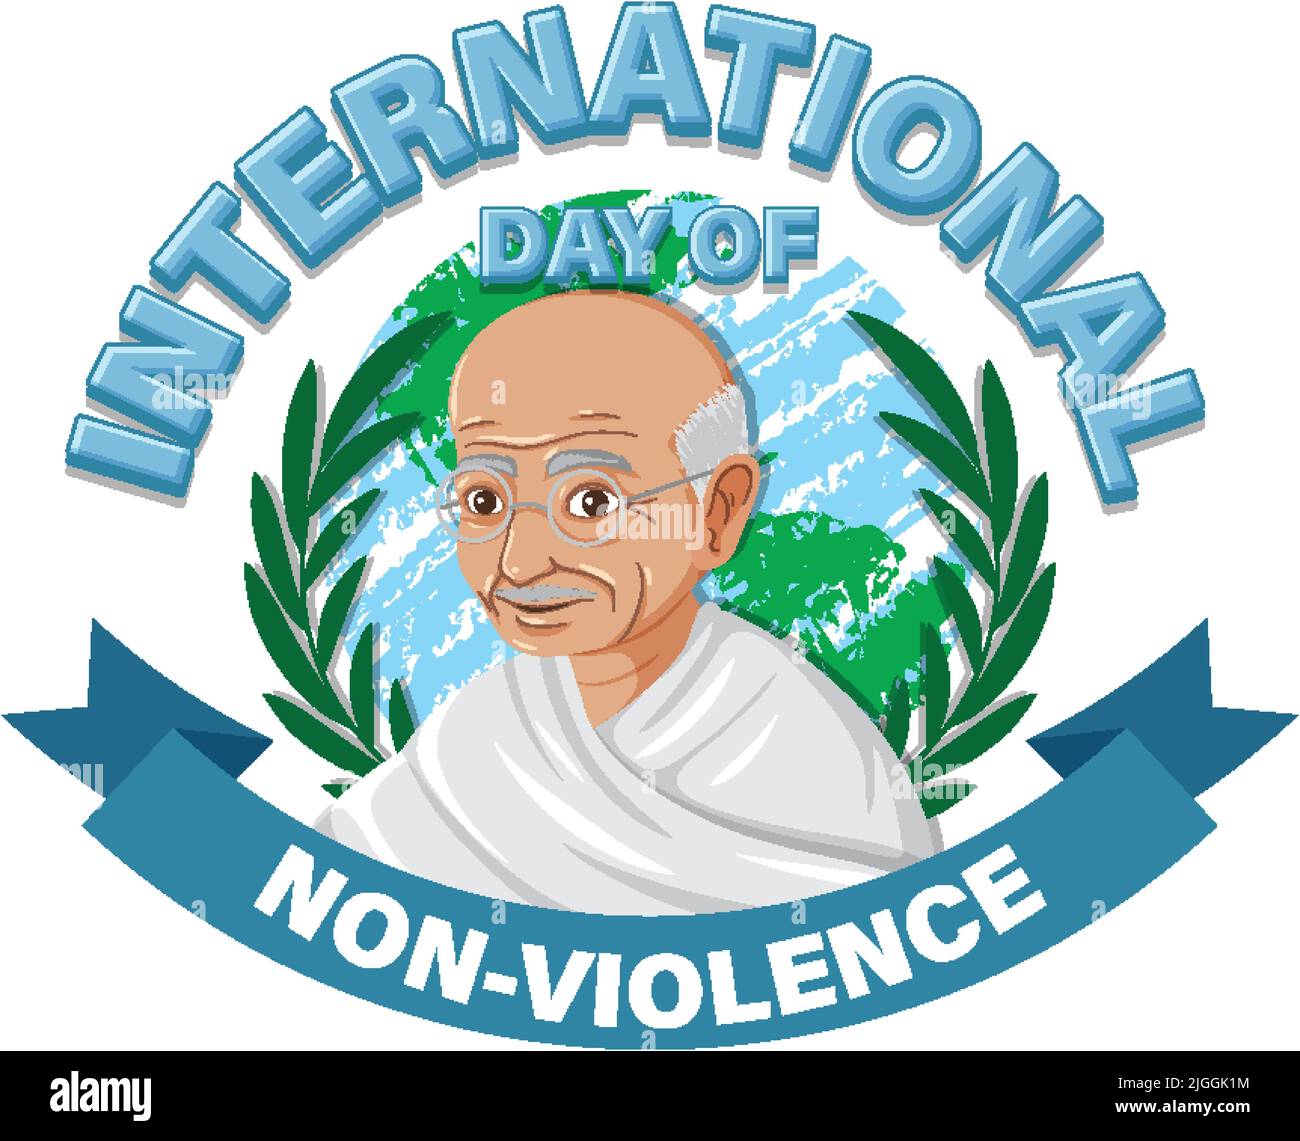 Non violence symbol Stock Vector Images - Page 3 - Alamy